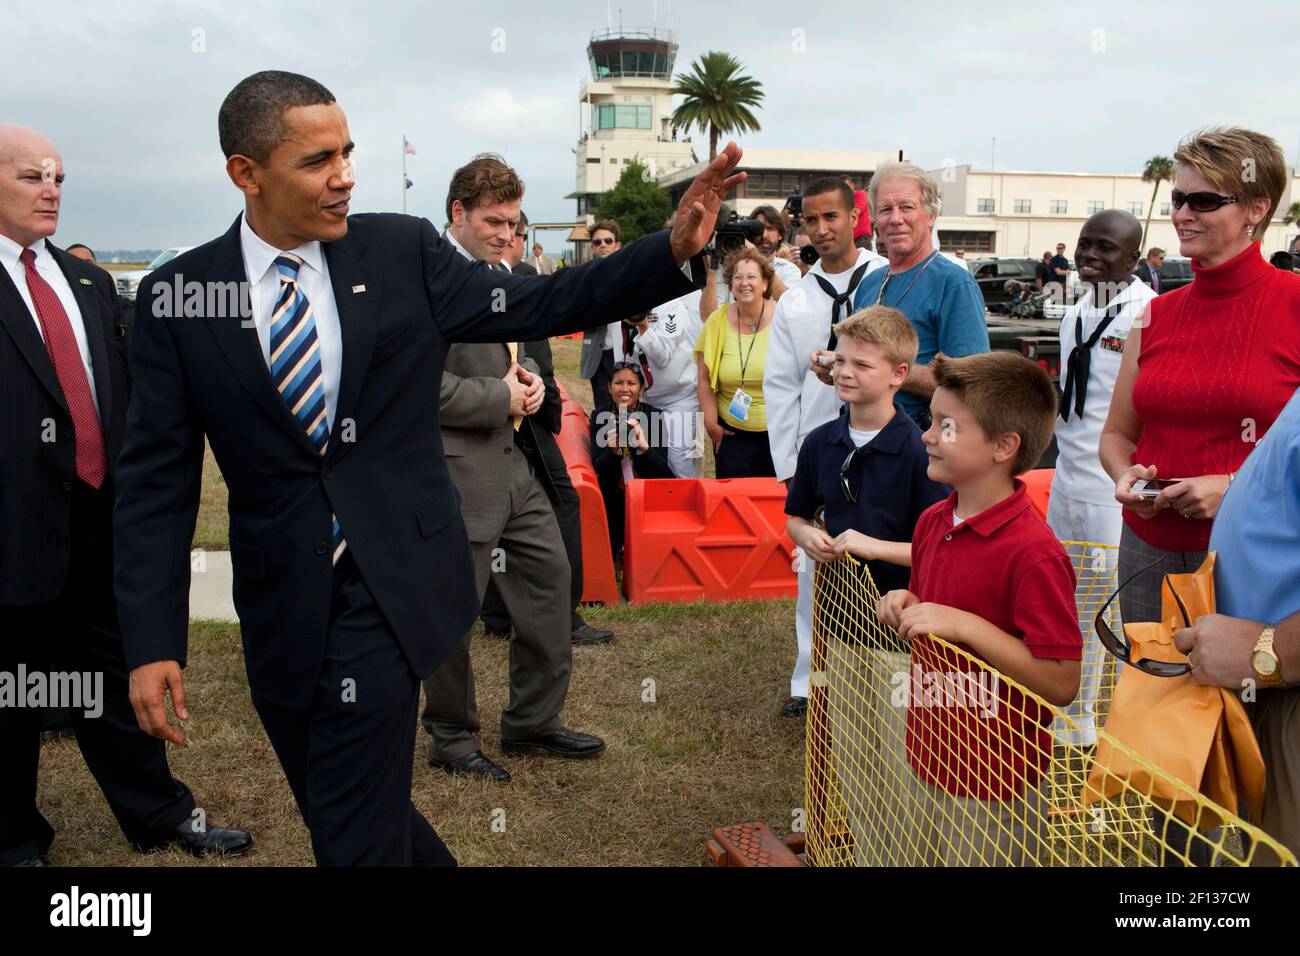 President Barack Obama waves to a family prior to departure from Naval Air Station Jacksonsville in Jacksonville Fla. en route to Miami Fla. Oct. 26 2009. Stock Photo